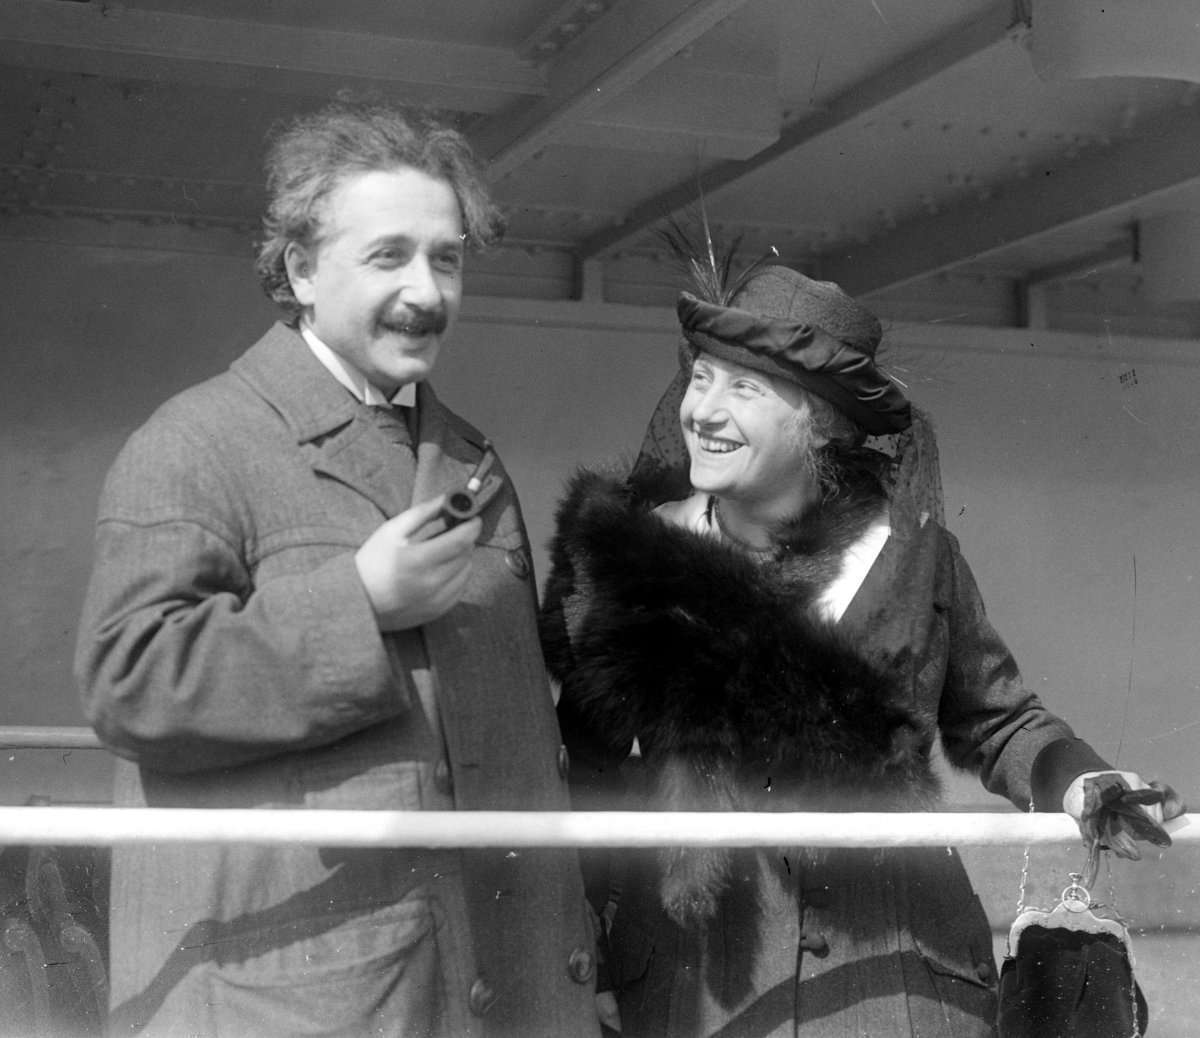 Einstein with his second wife, Elsa, in 1921.